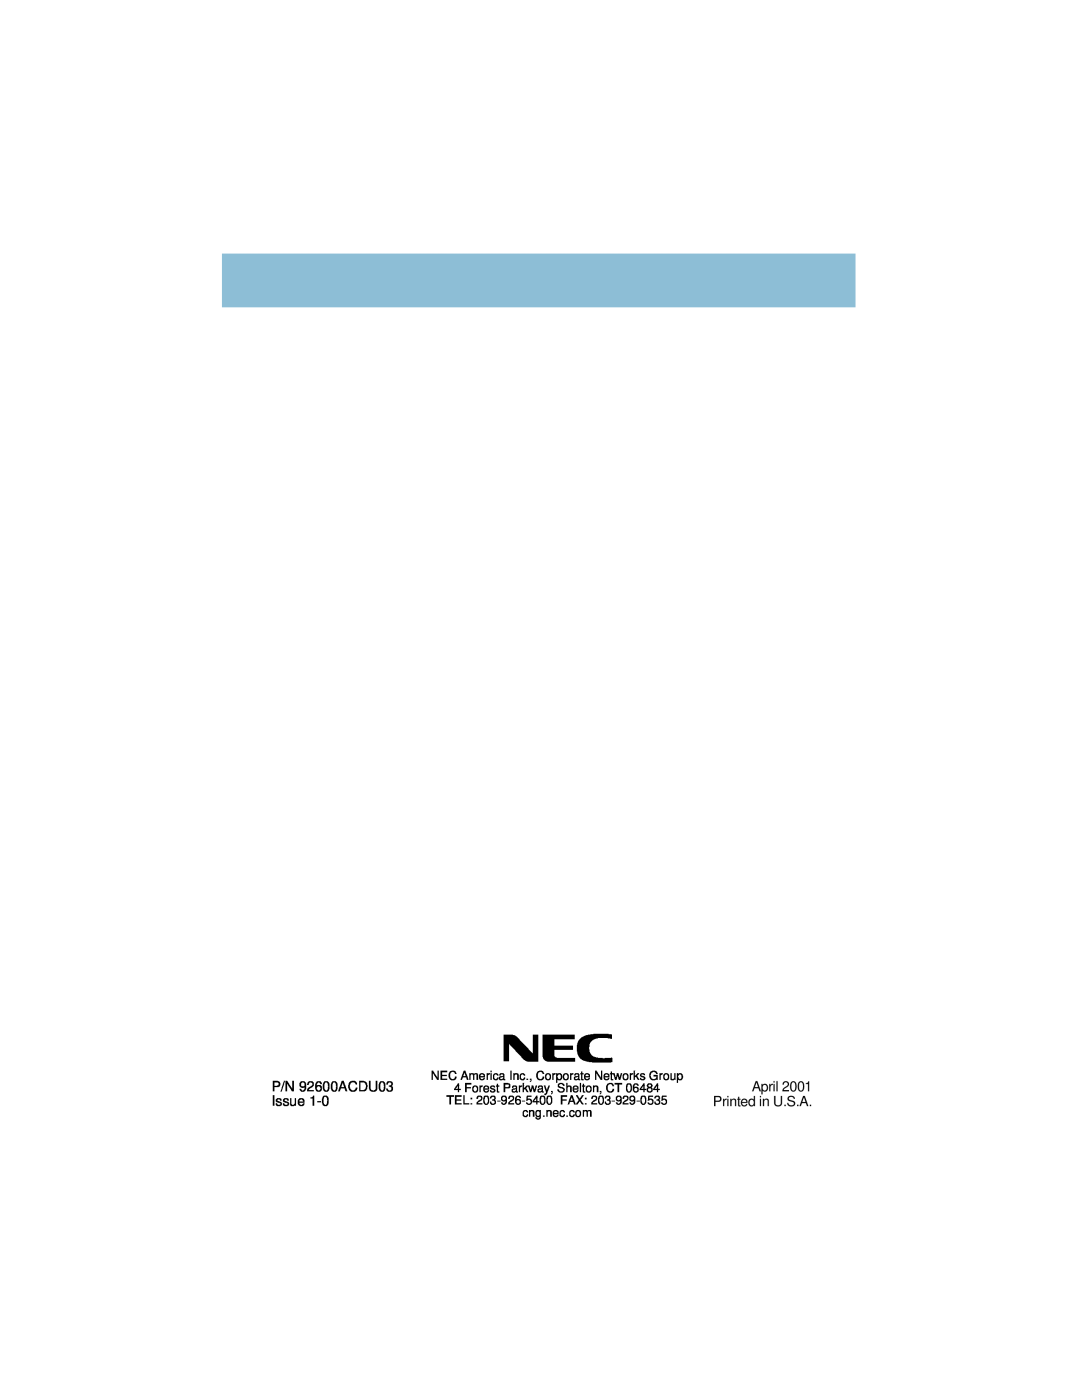 NEC i-Series manual P/N 92600ACDU03, April, Issue, TEL 203-926-5400 FAX, Printed in U.S.A, Forest Parkway, Shelton, CT 